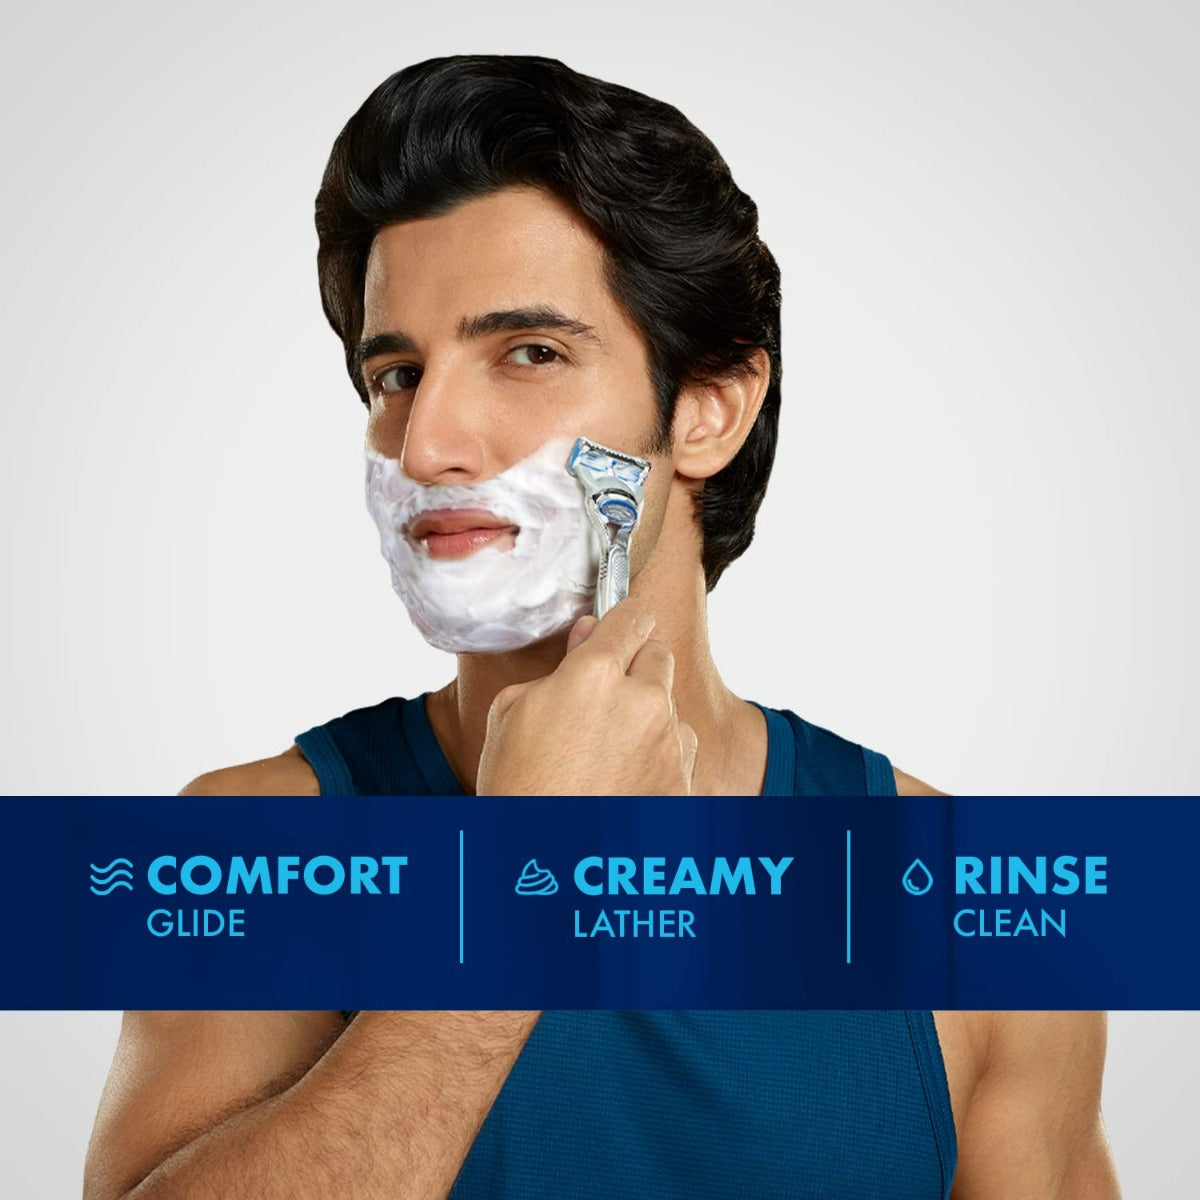 Gillette Classic Regular Pre Shave Foam (418gm) with 33% Extra Free